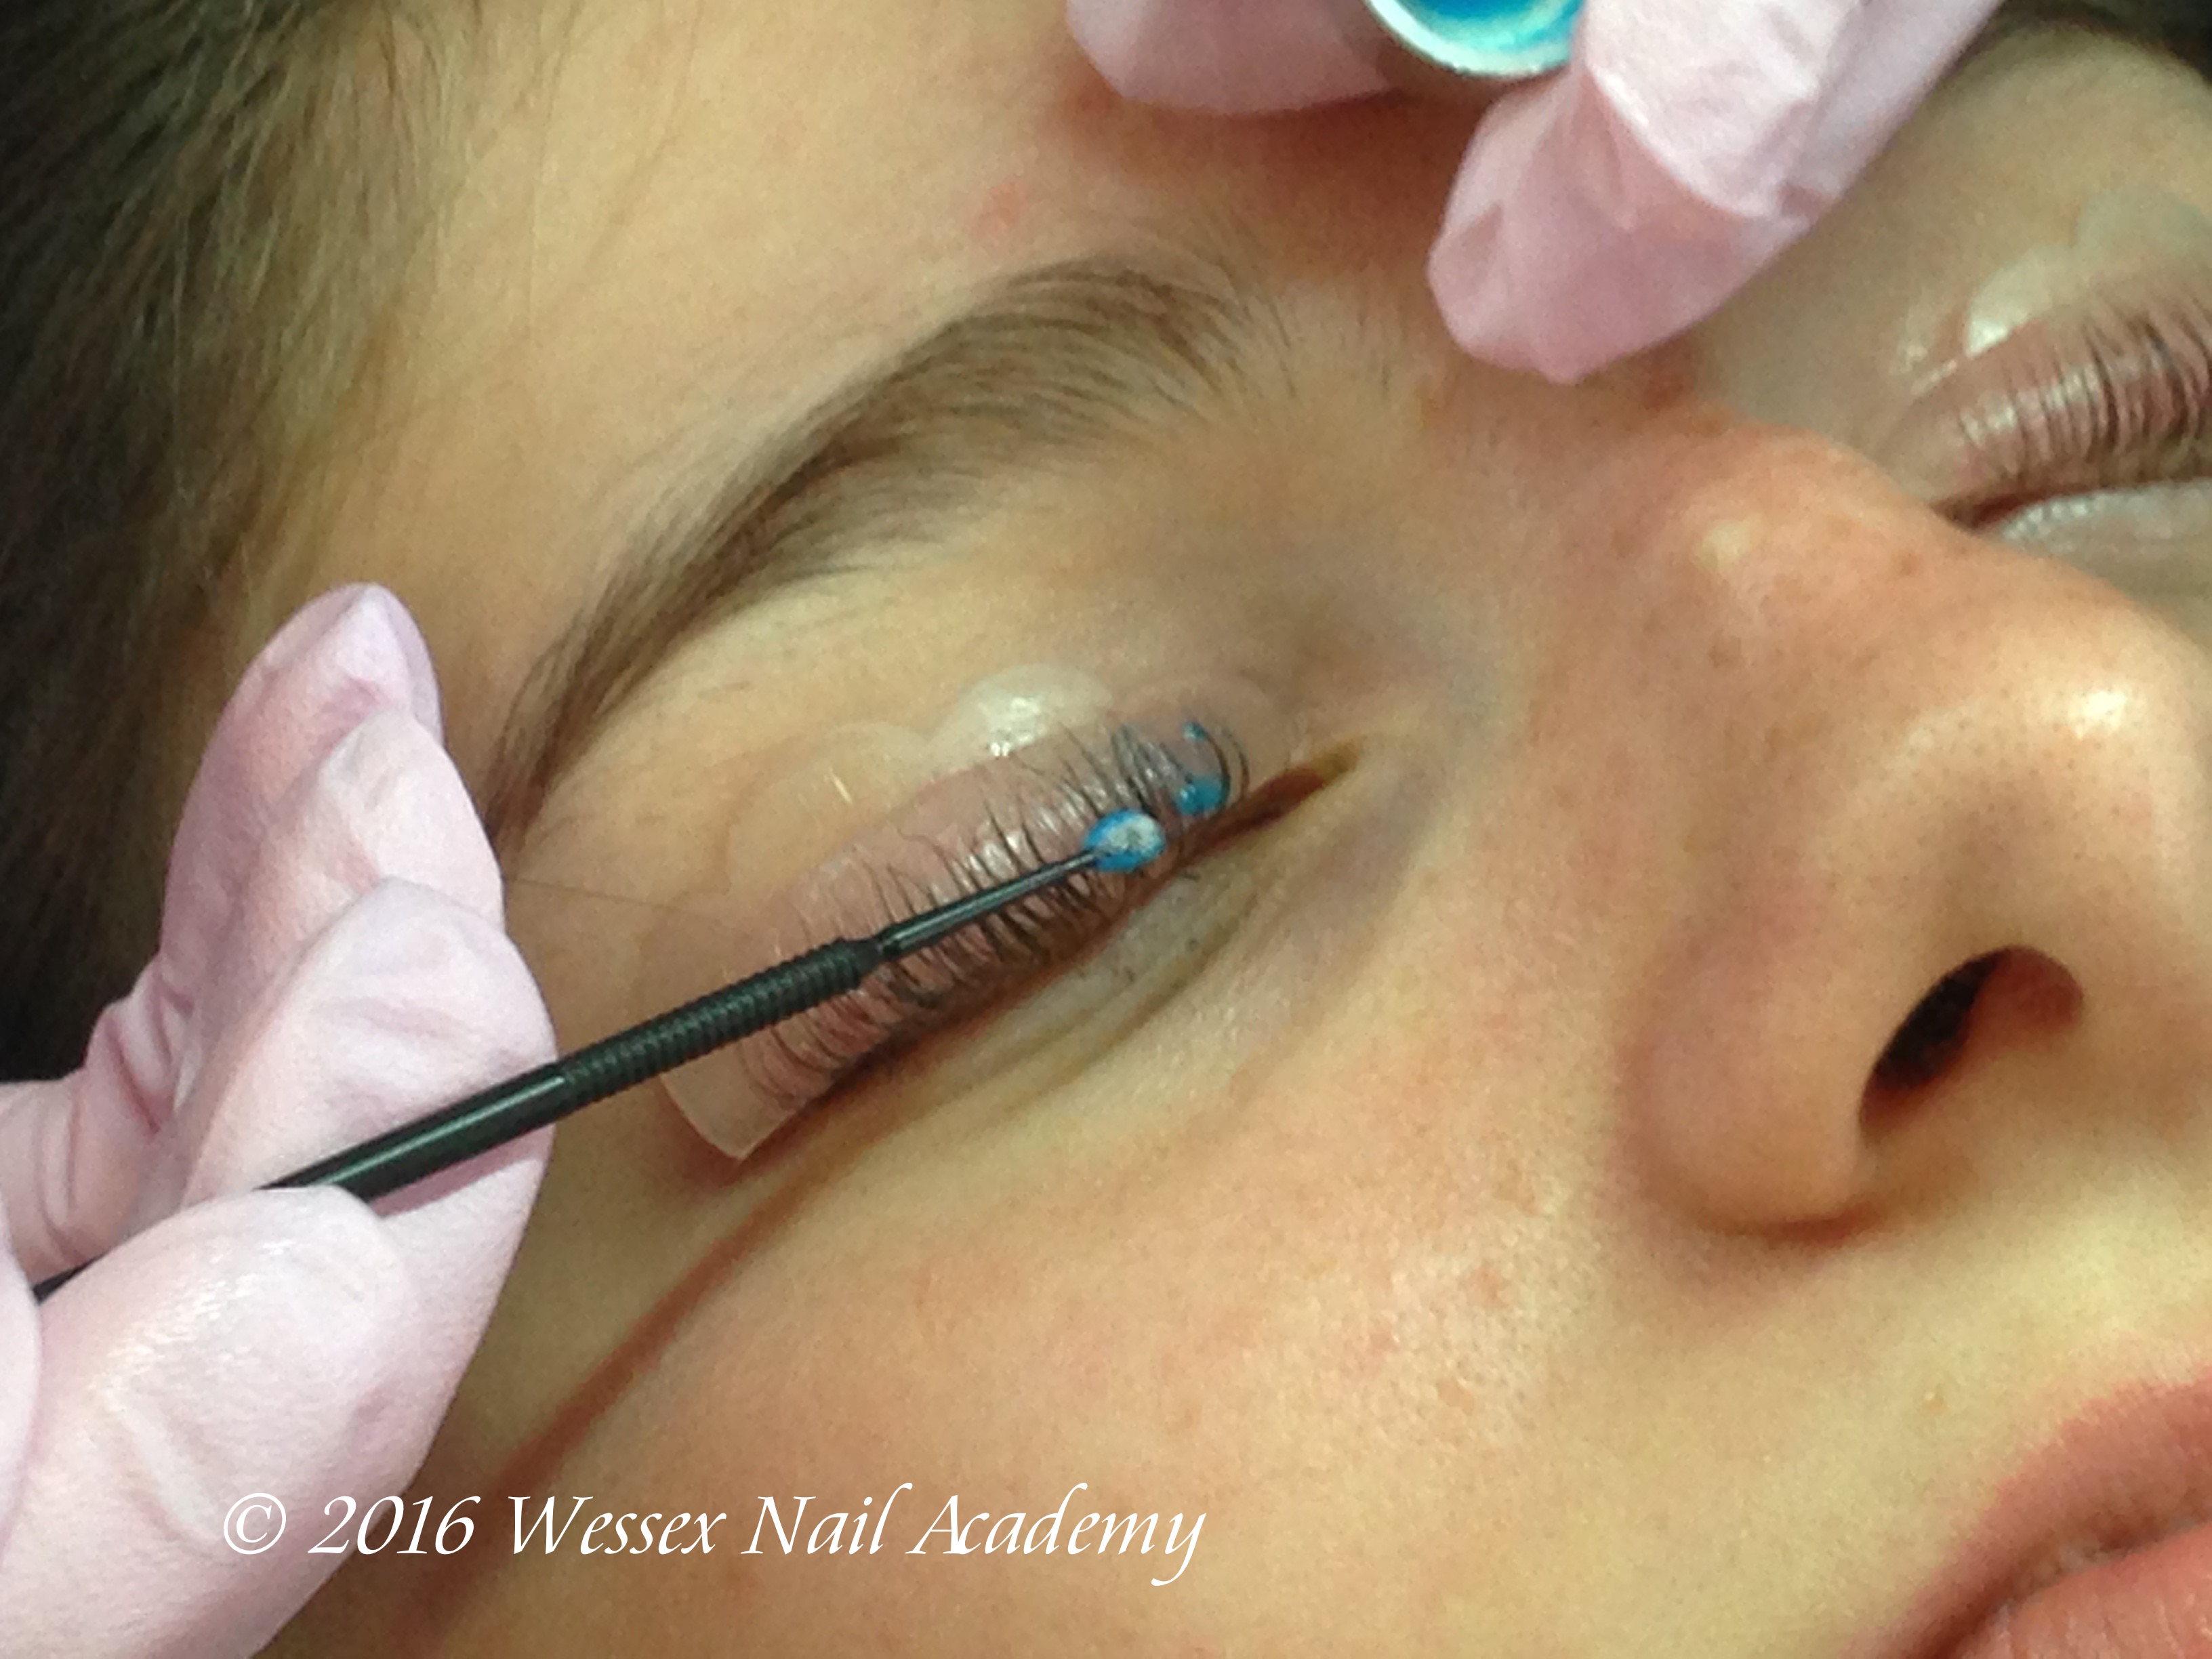  Lash Lifting and Perming Lash and Brow Tinting training course, Wessex Nail Academy Okeford Fitzpaine, Dorset